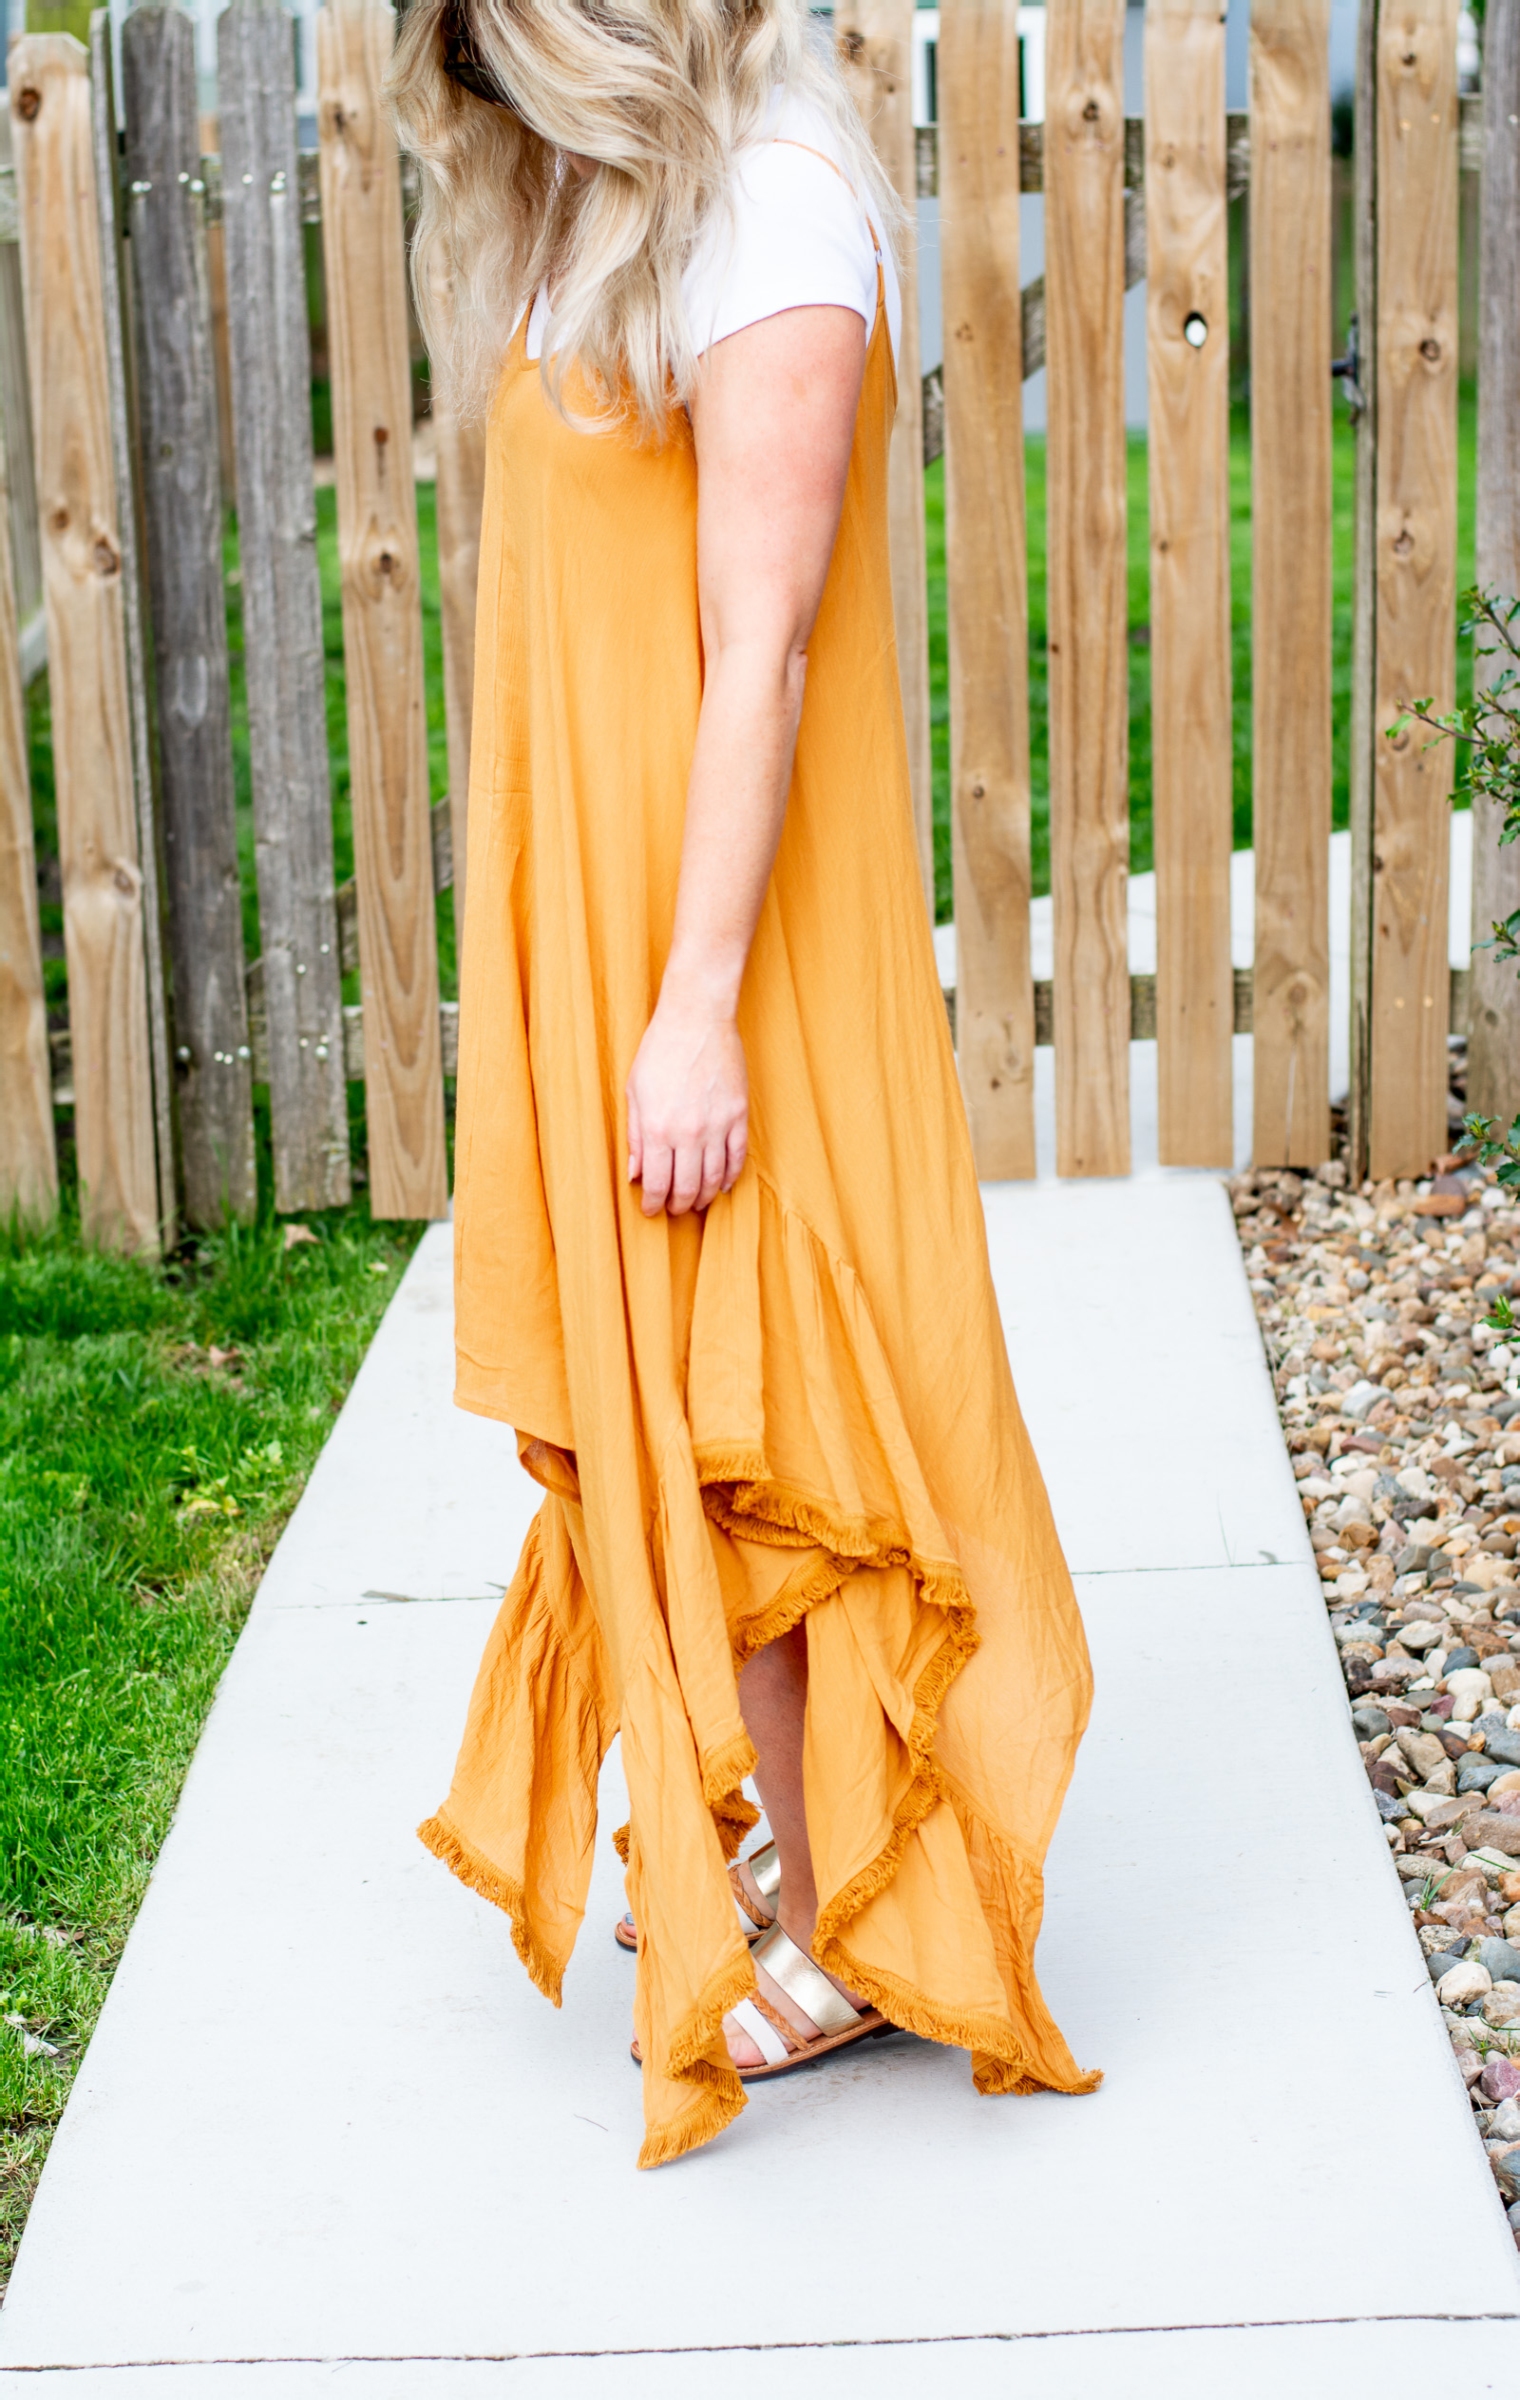 Summer Layers: Crop Tops and Maxi Dresses.